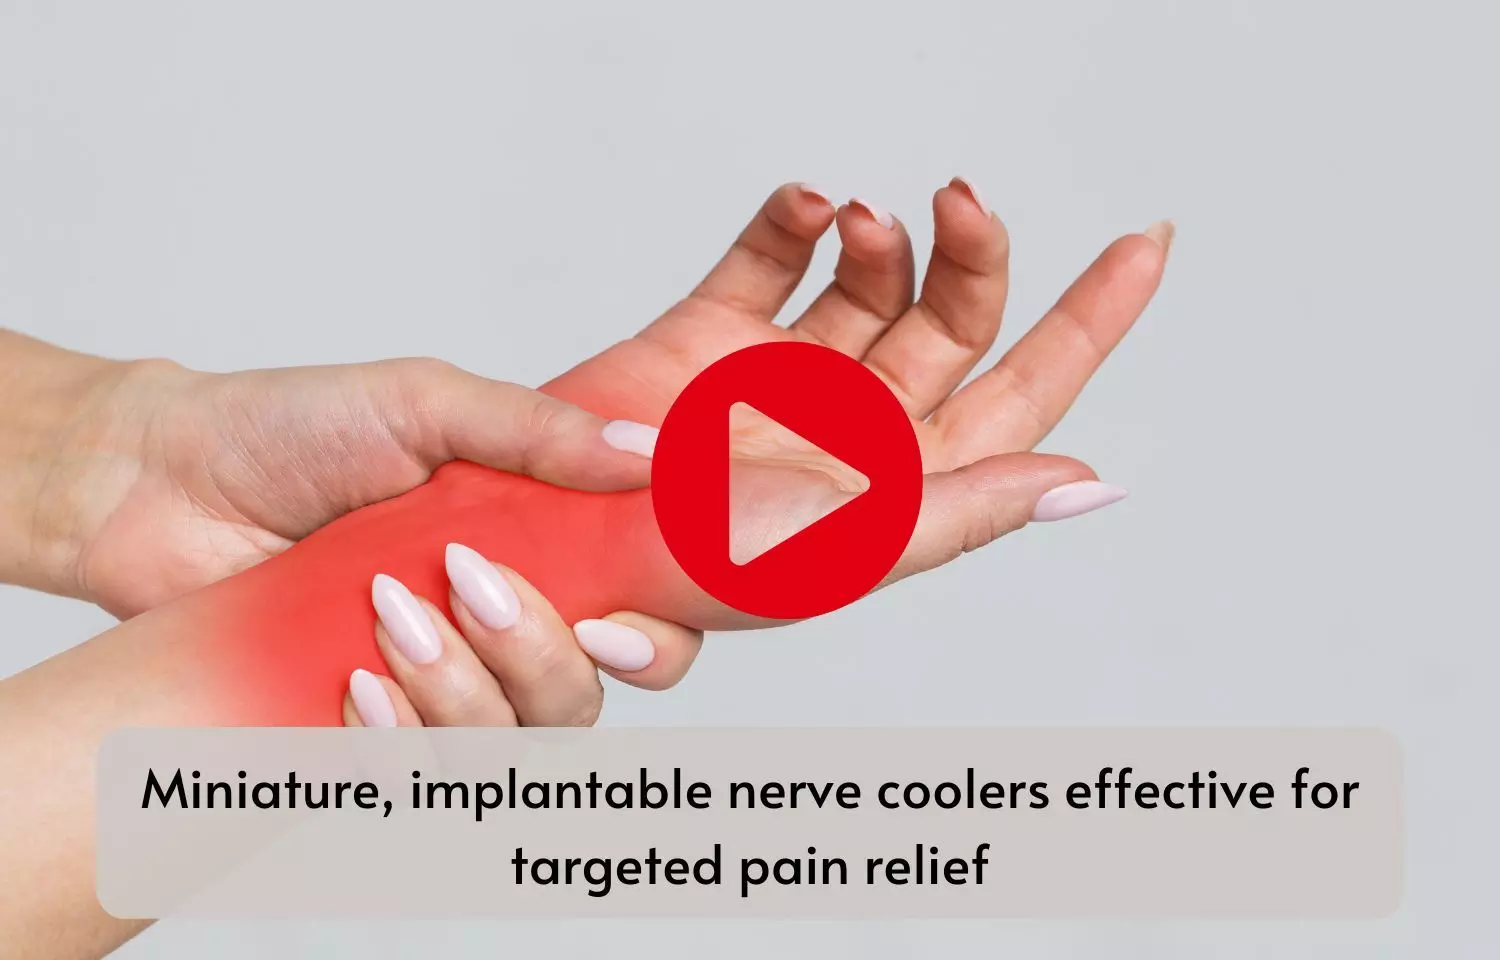 Miniature, implantable nerve coolers effective for targeted pain relief